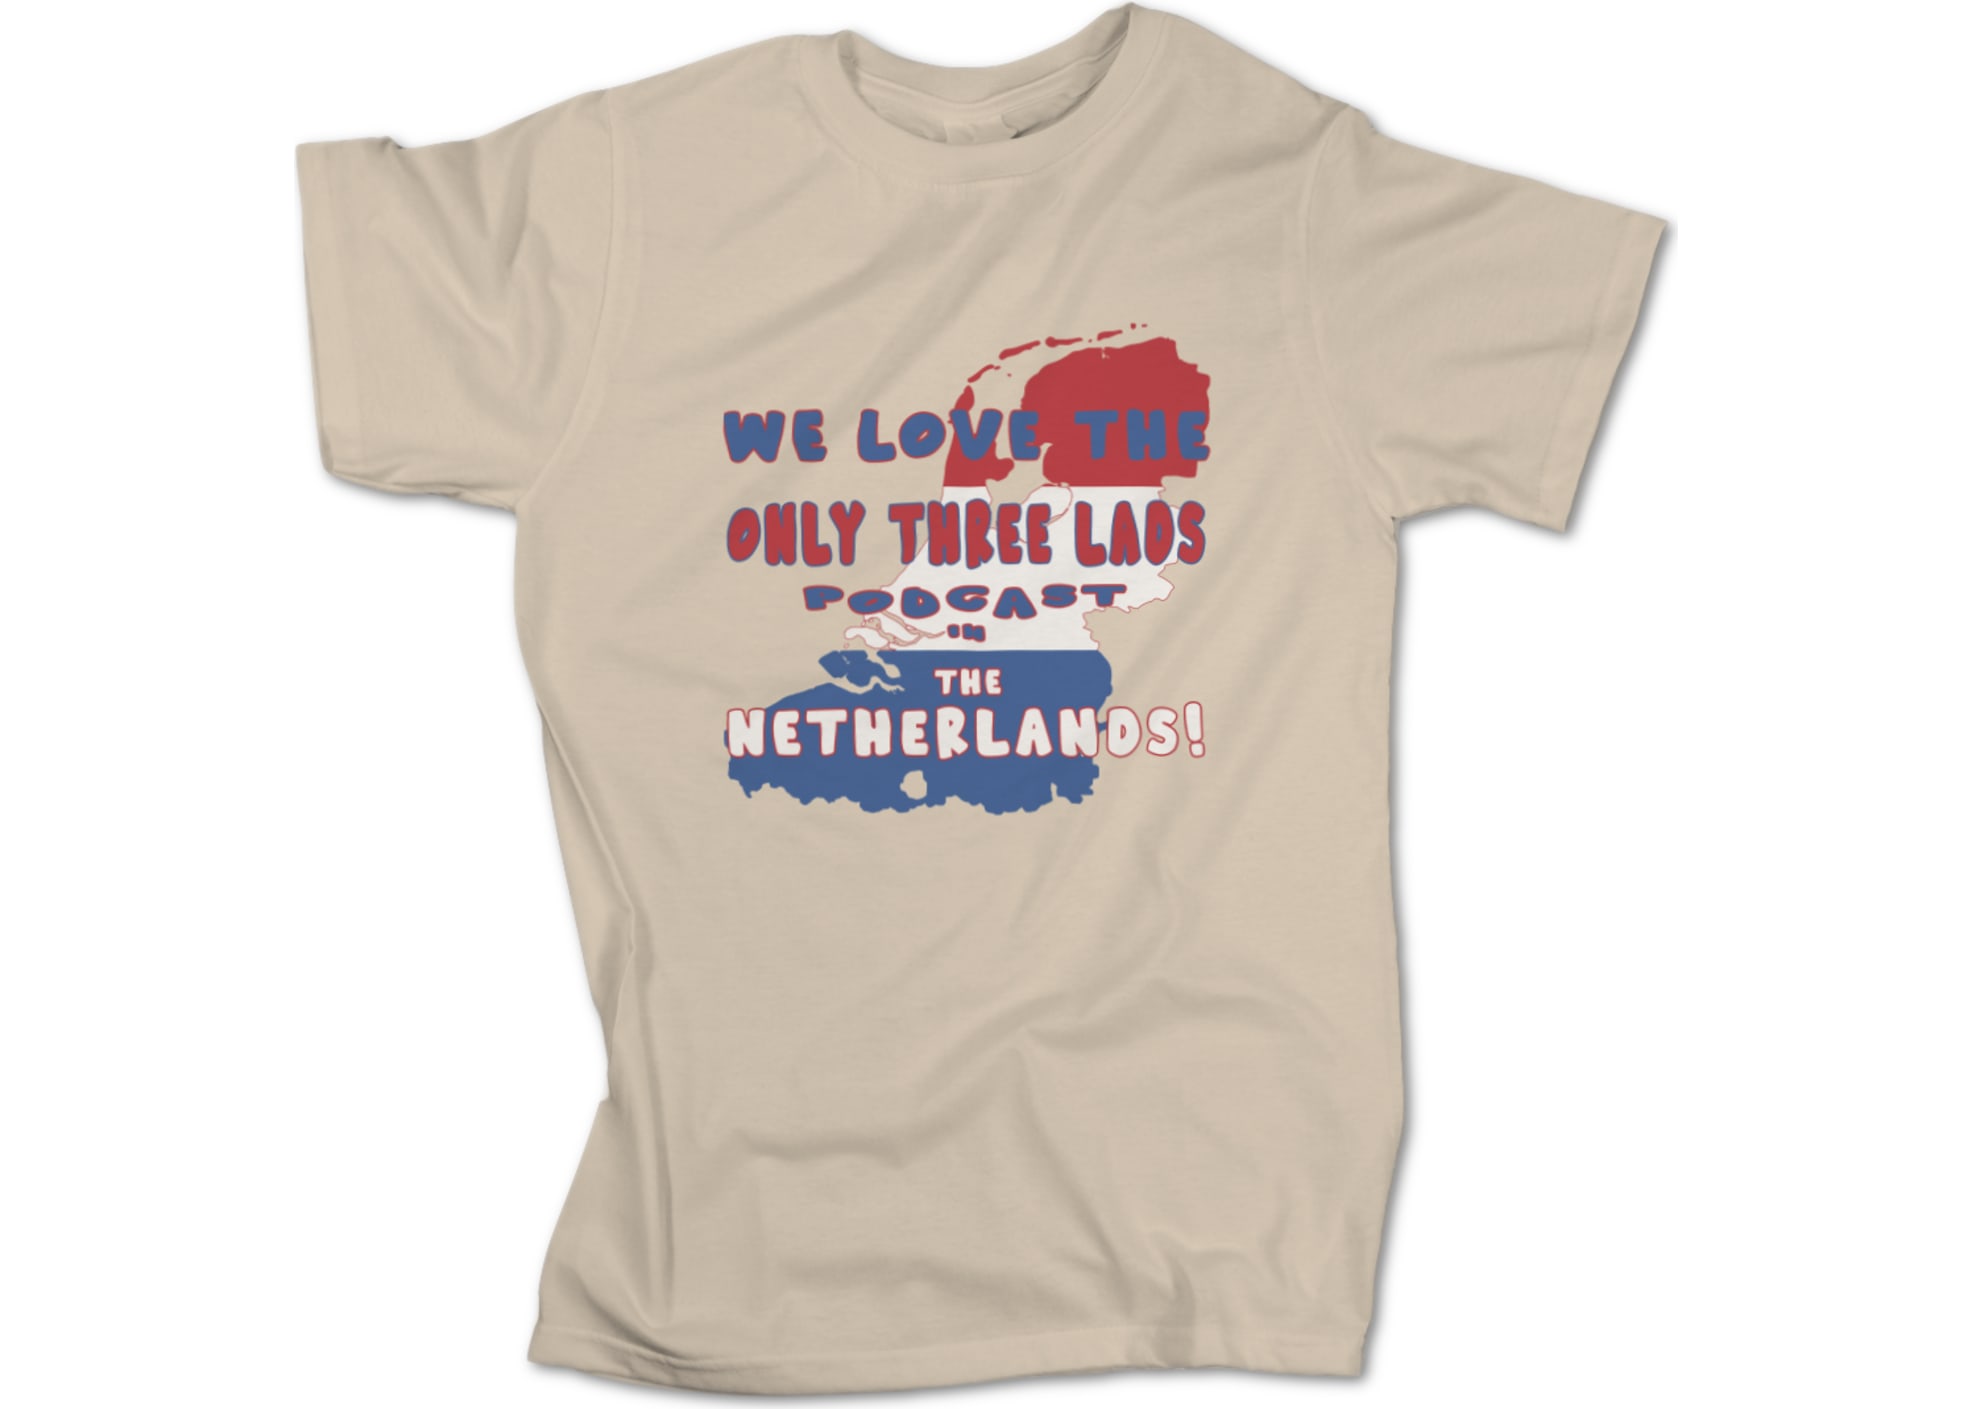 Only three lads the netherlands   cream 1622231317